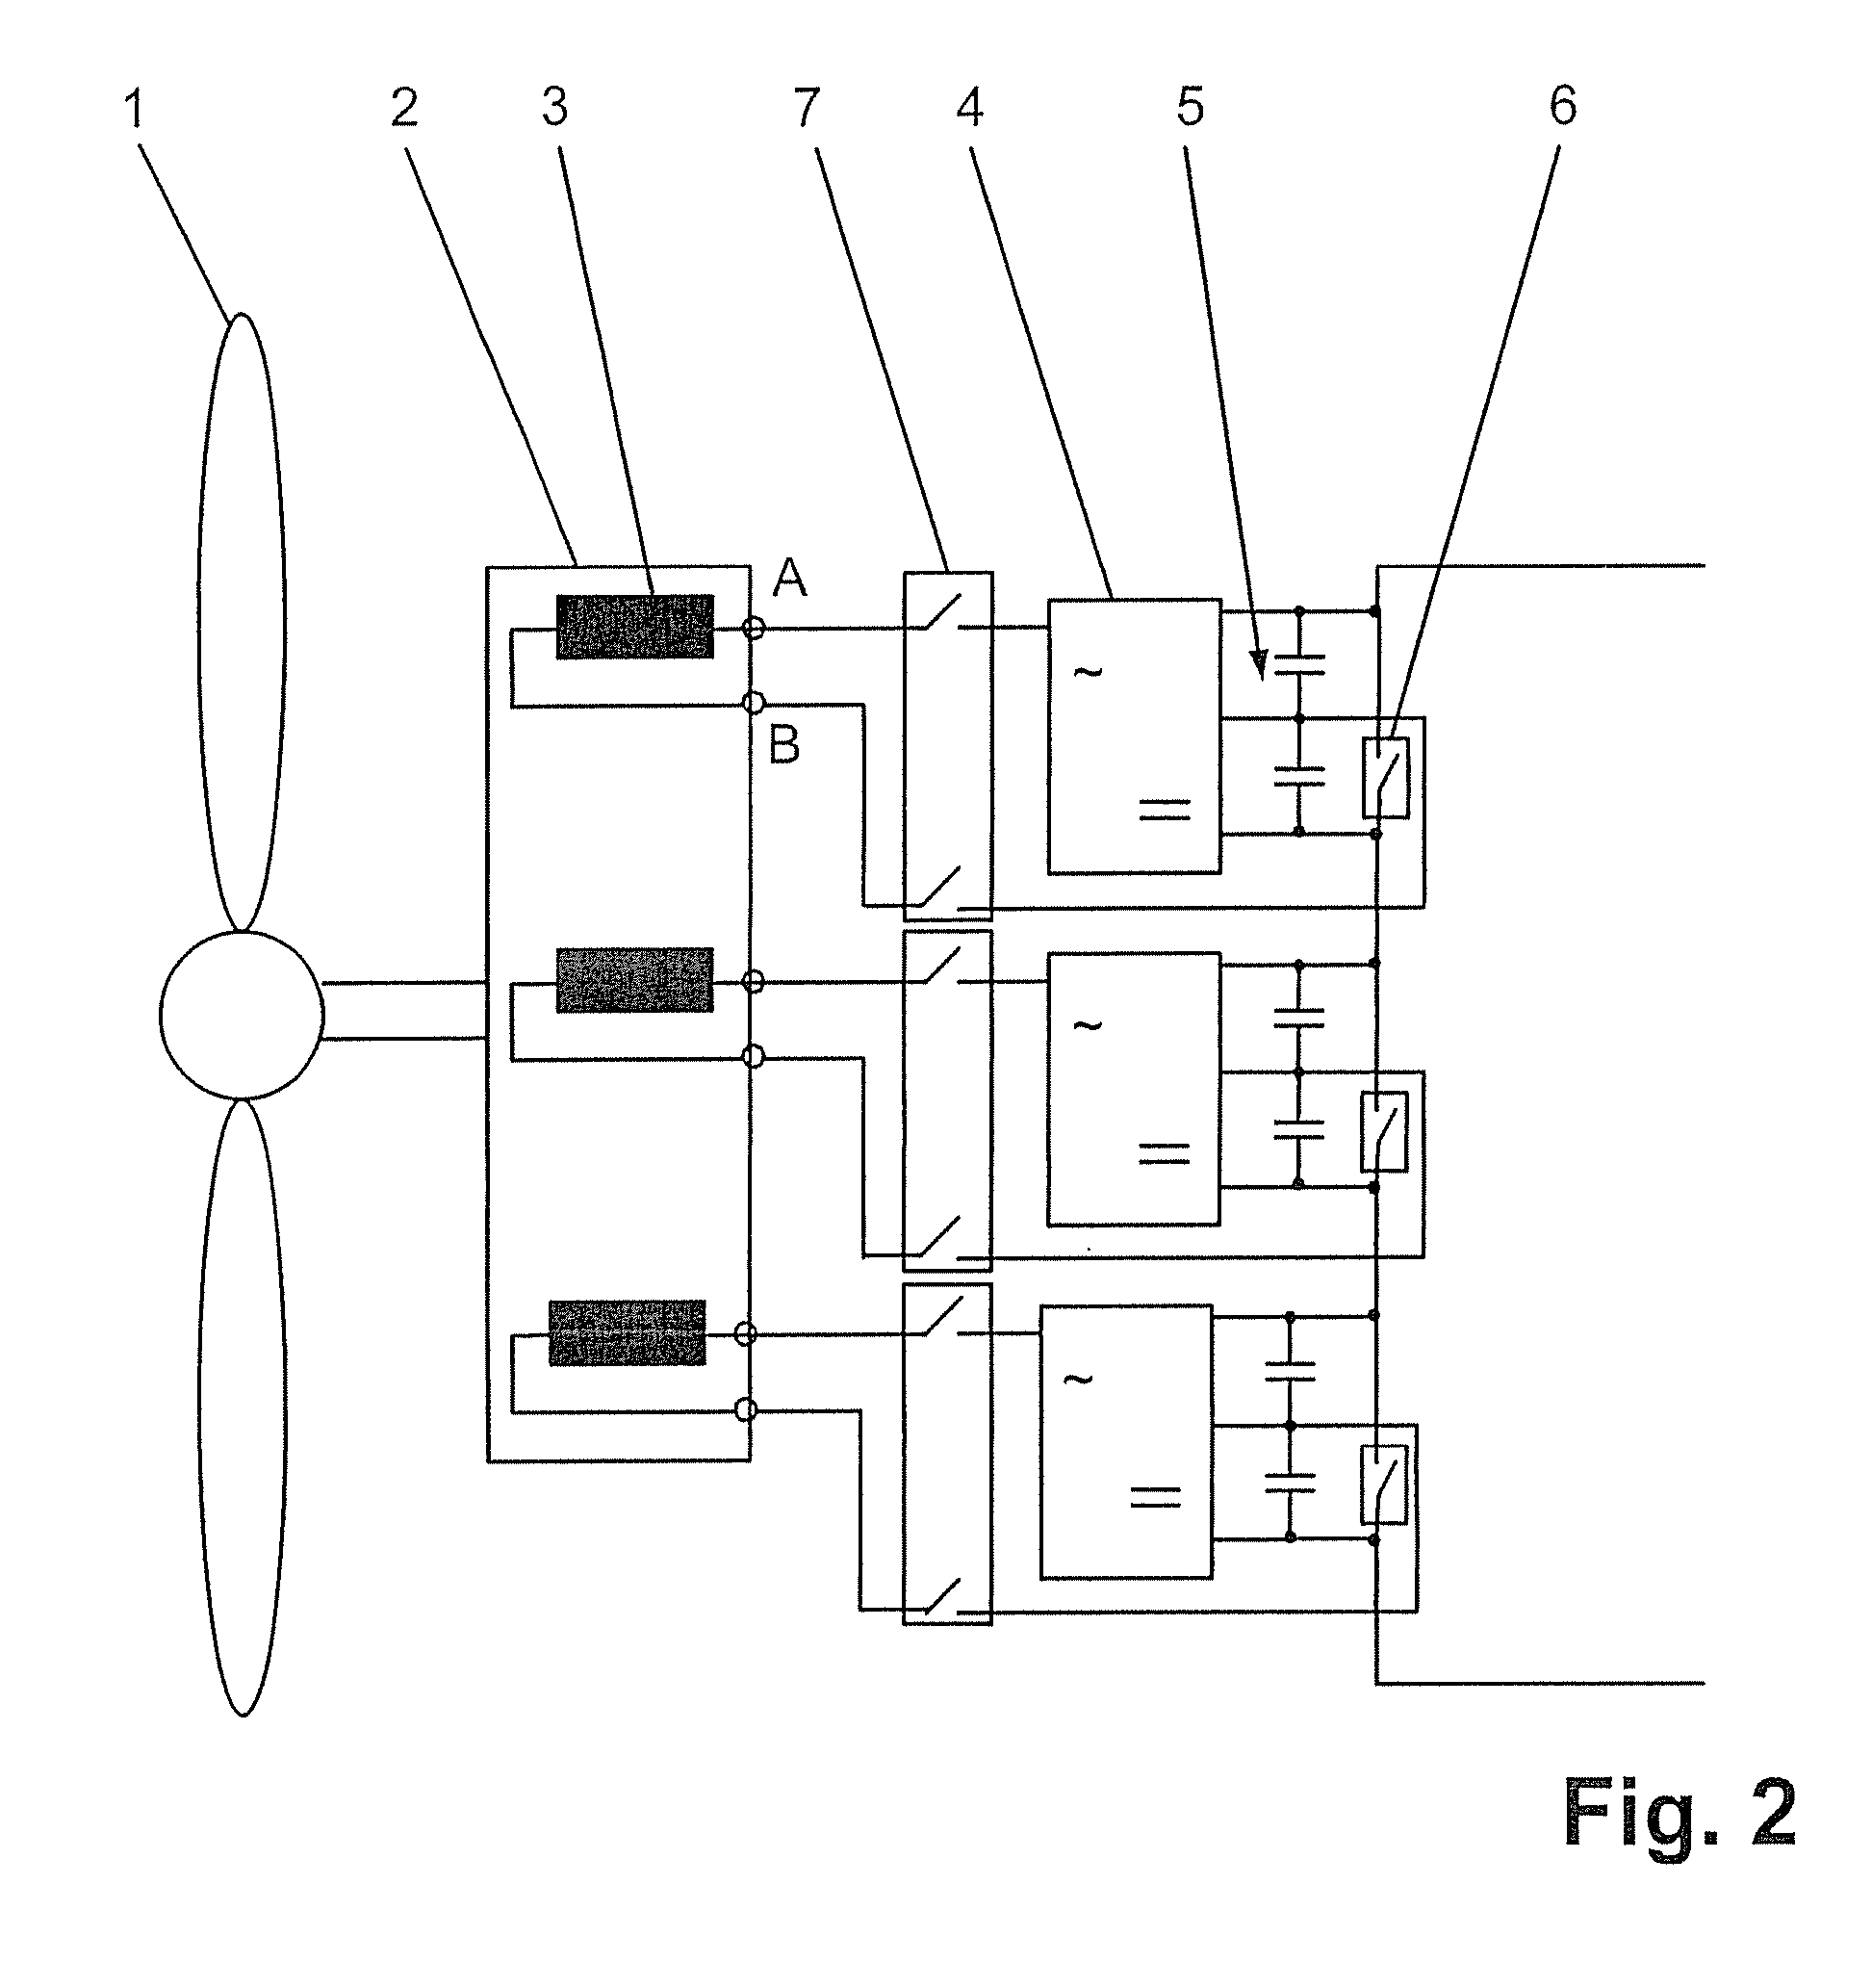 Energy system for producing DC voltage using rectifiers and energy storage circuits